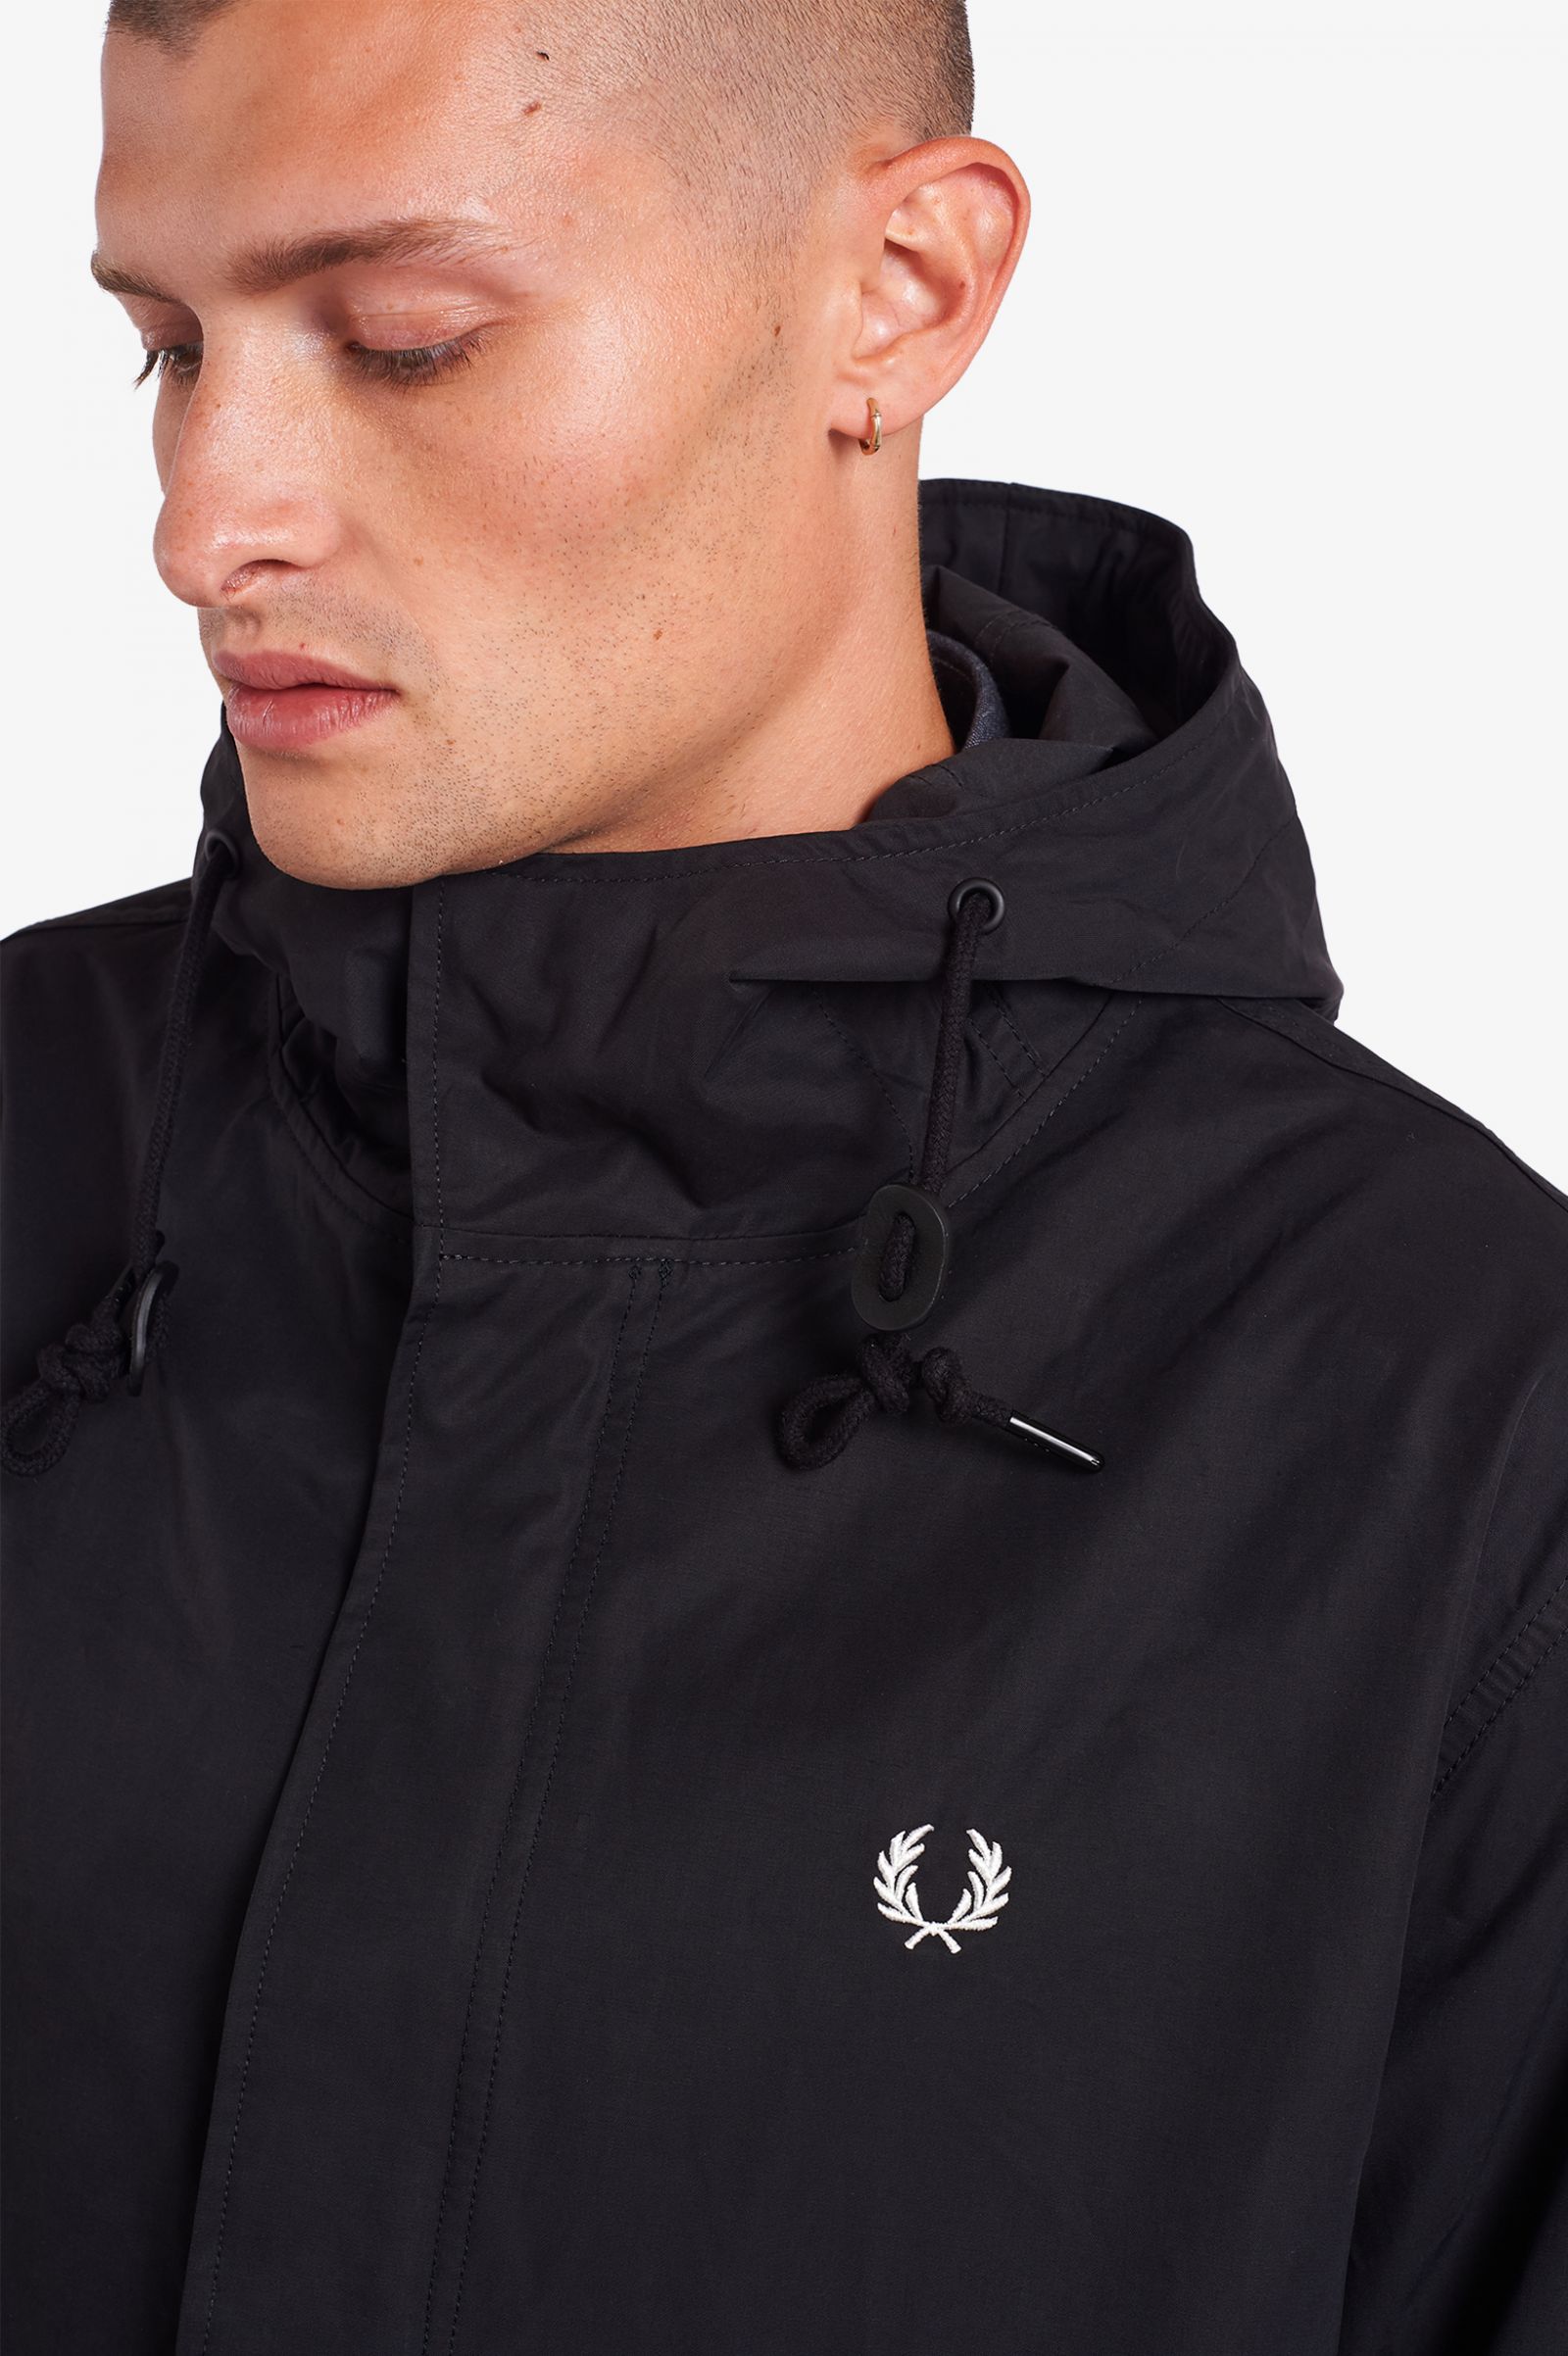 Fred Perry Parka Black Flash Sales, SAVE 53%.